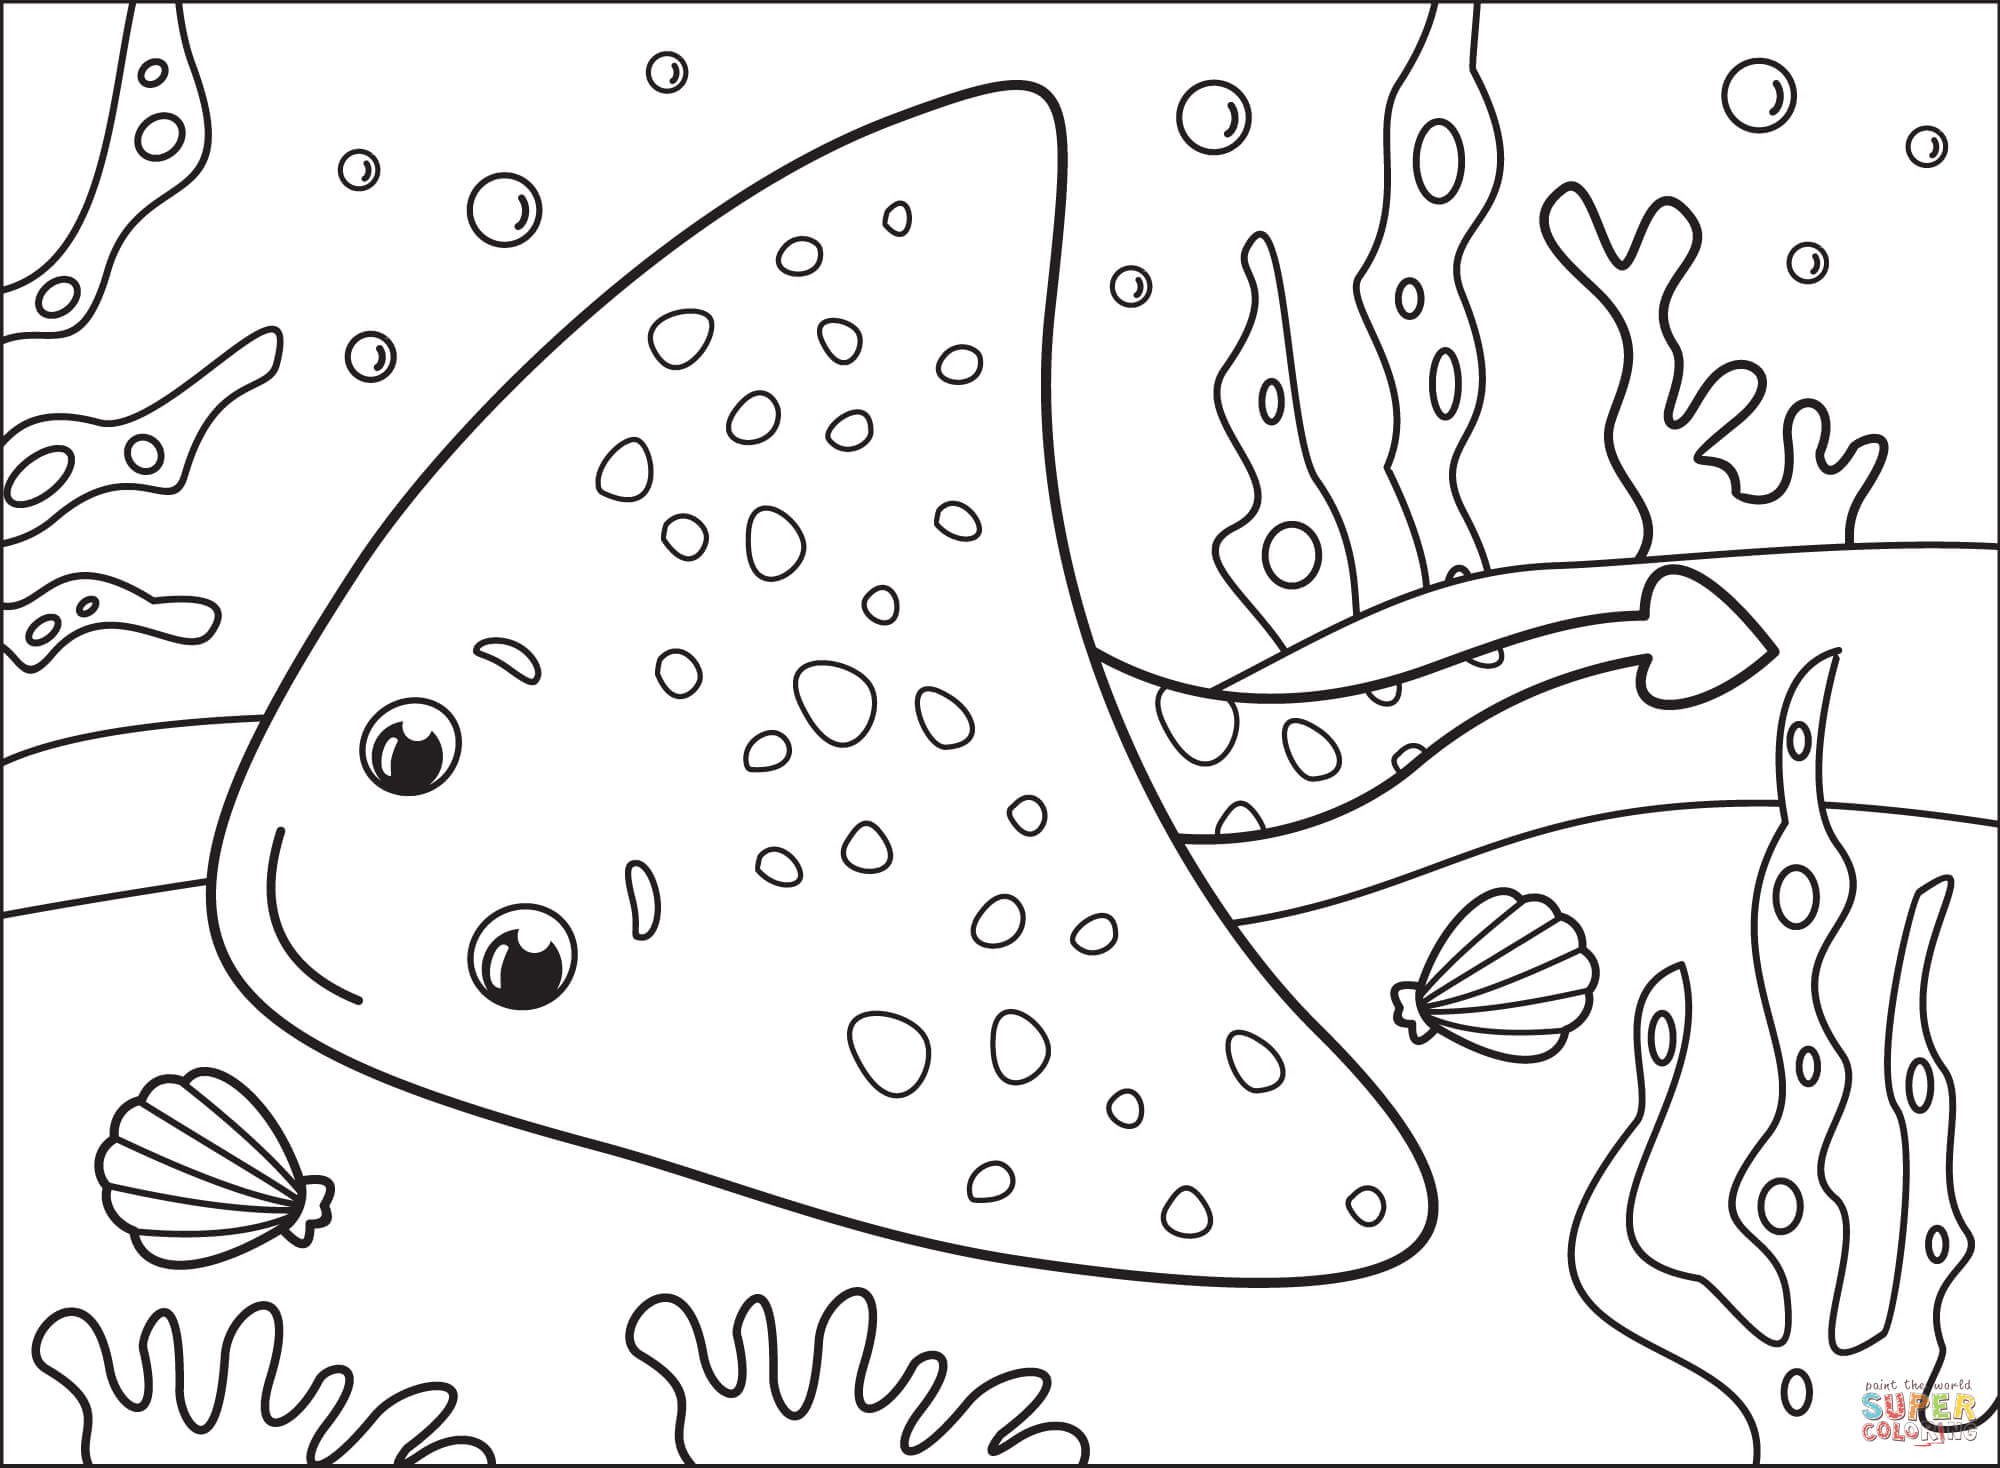 Stingray coloring page free printable coloring pages